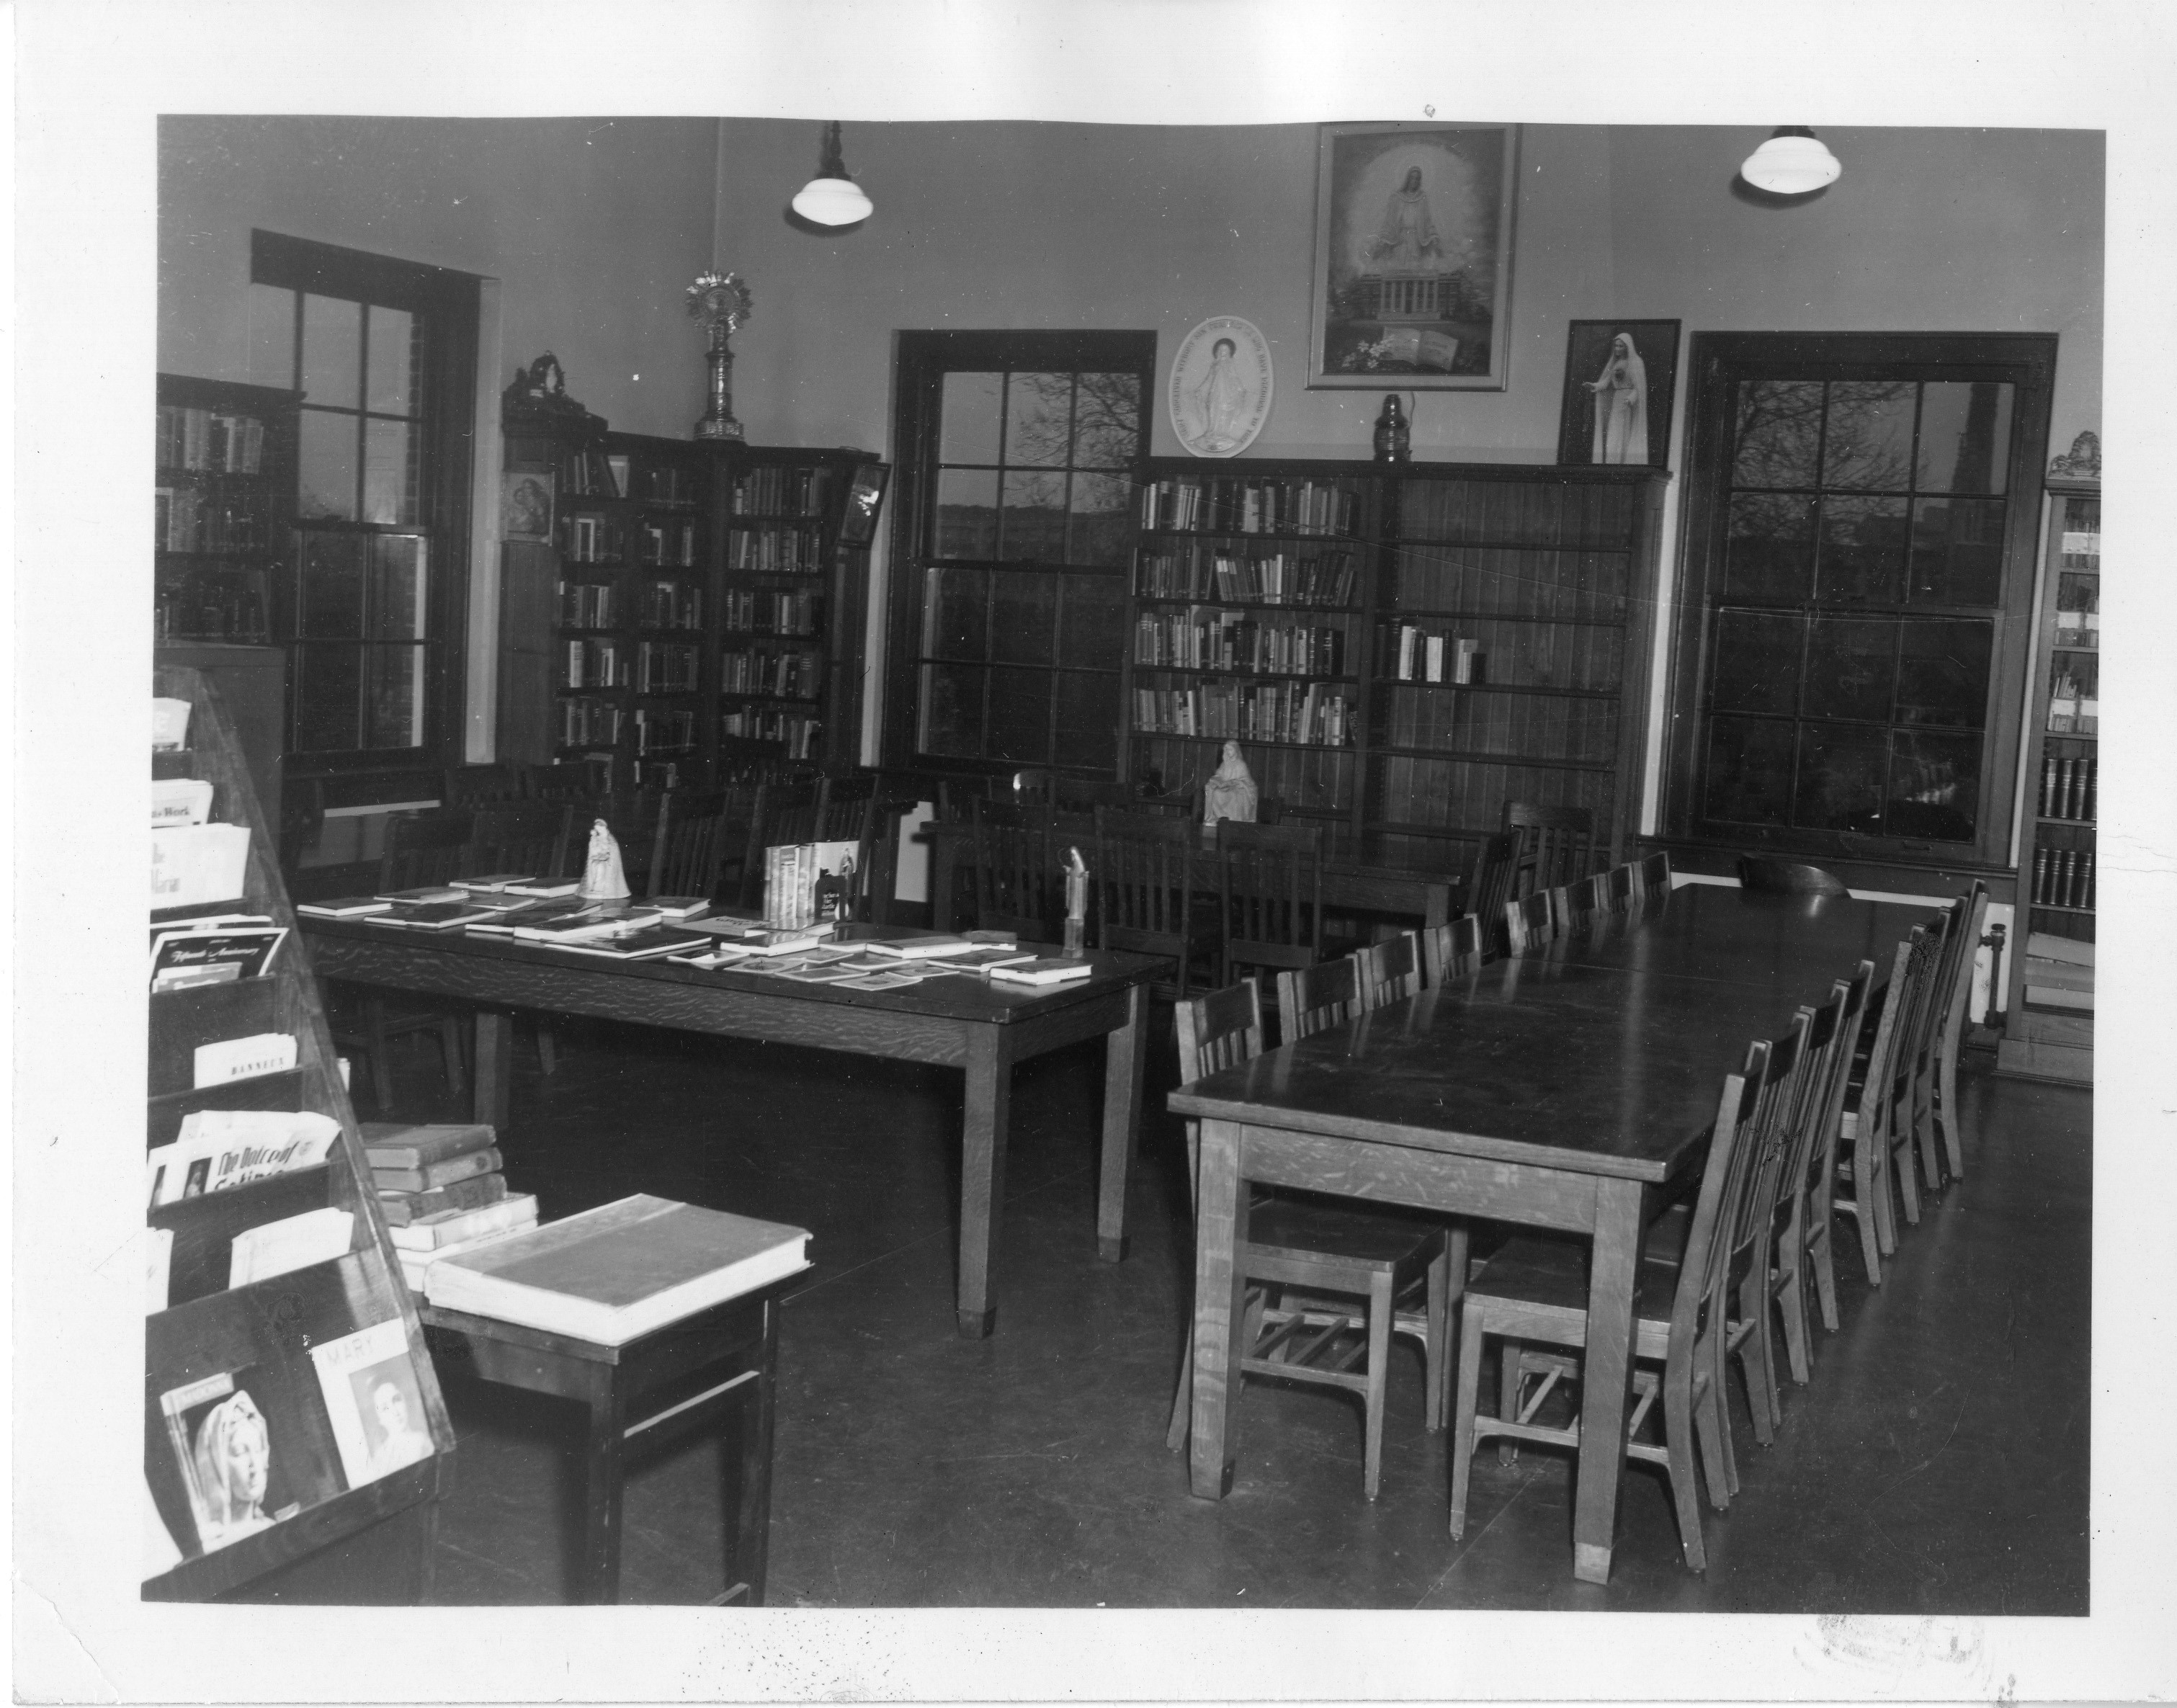 A view of the Marian Library reading room in Albert Emanuel Library, circa 1960.